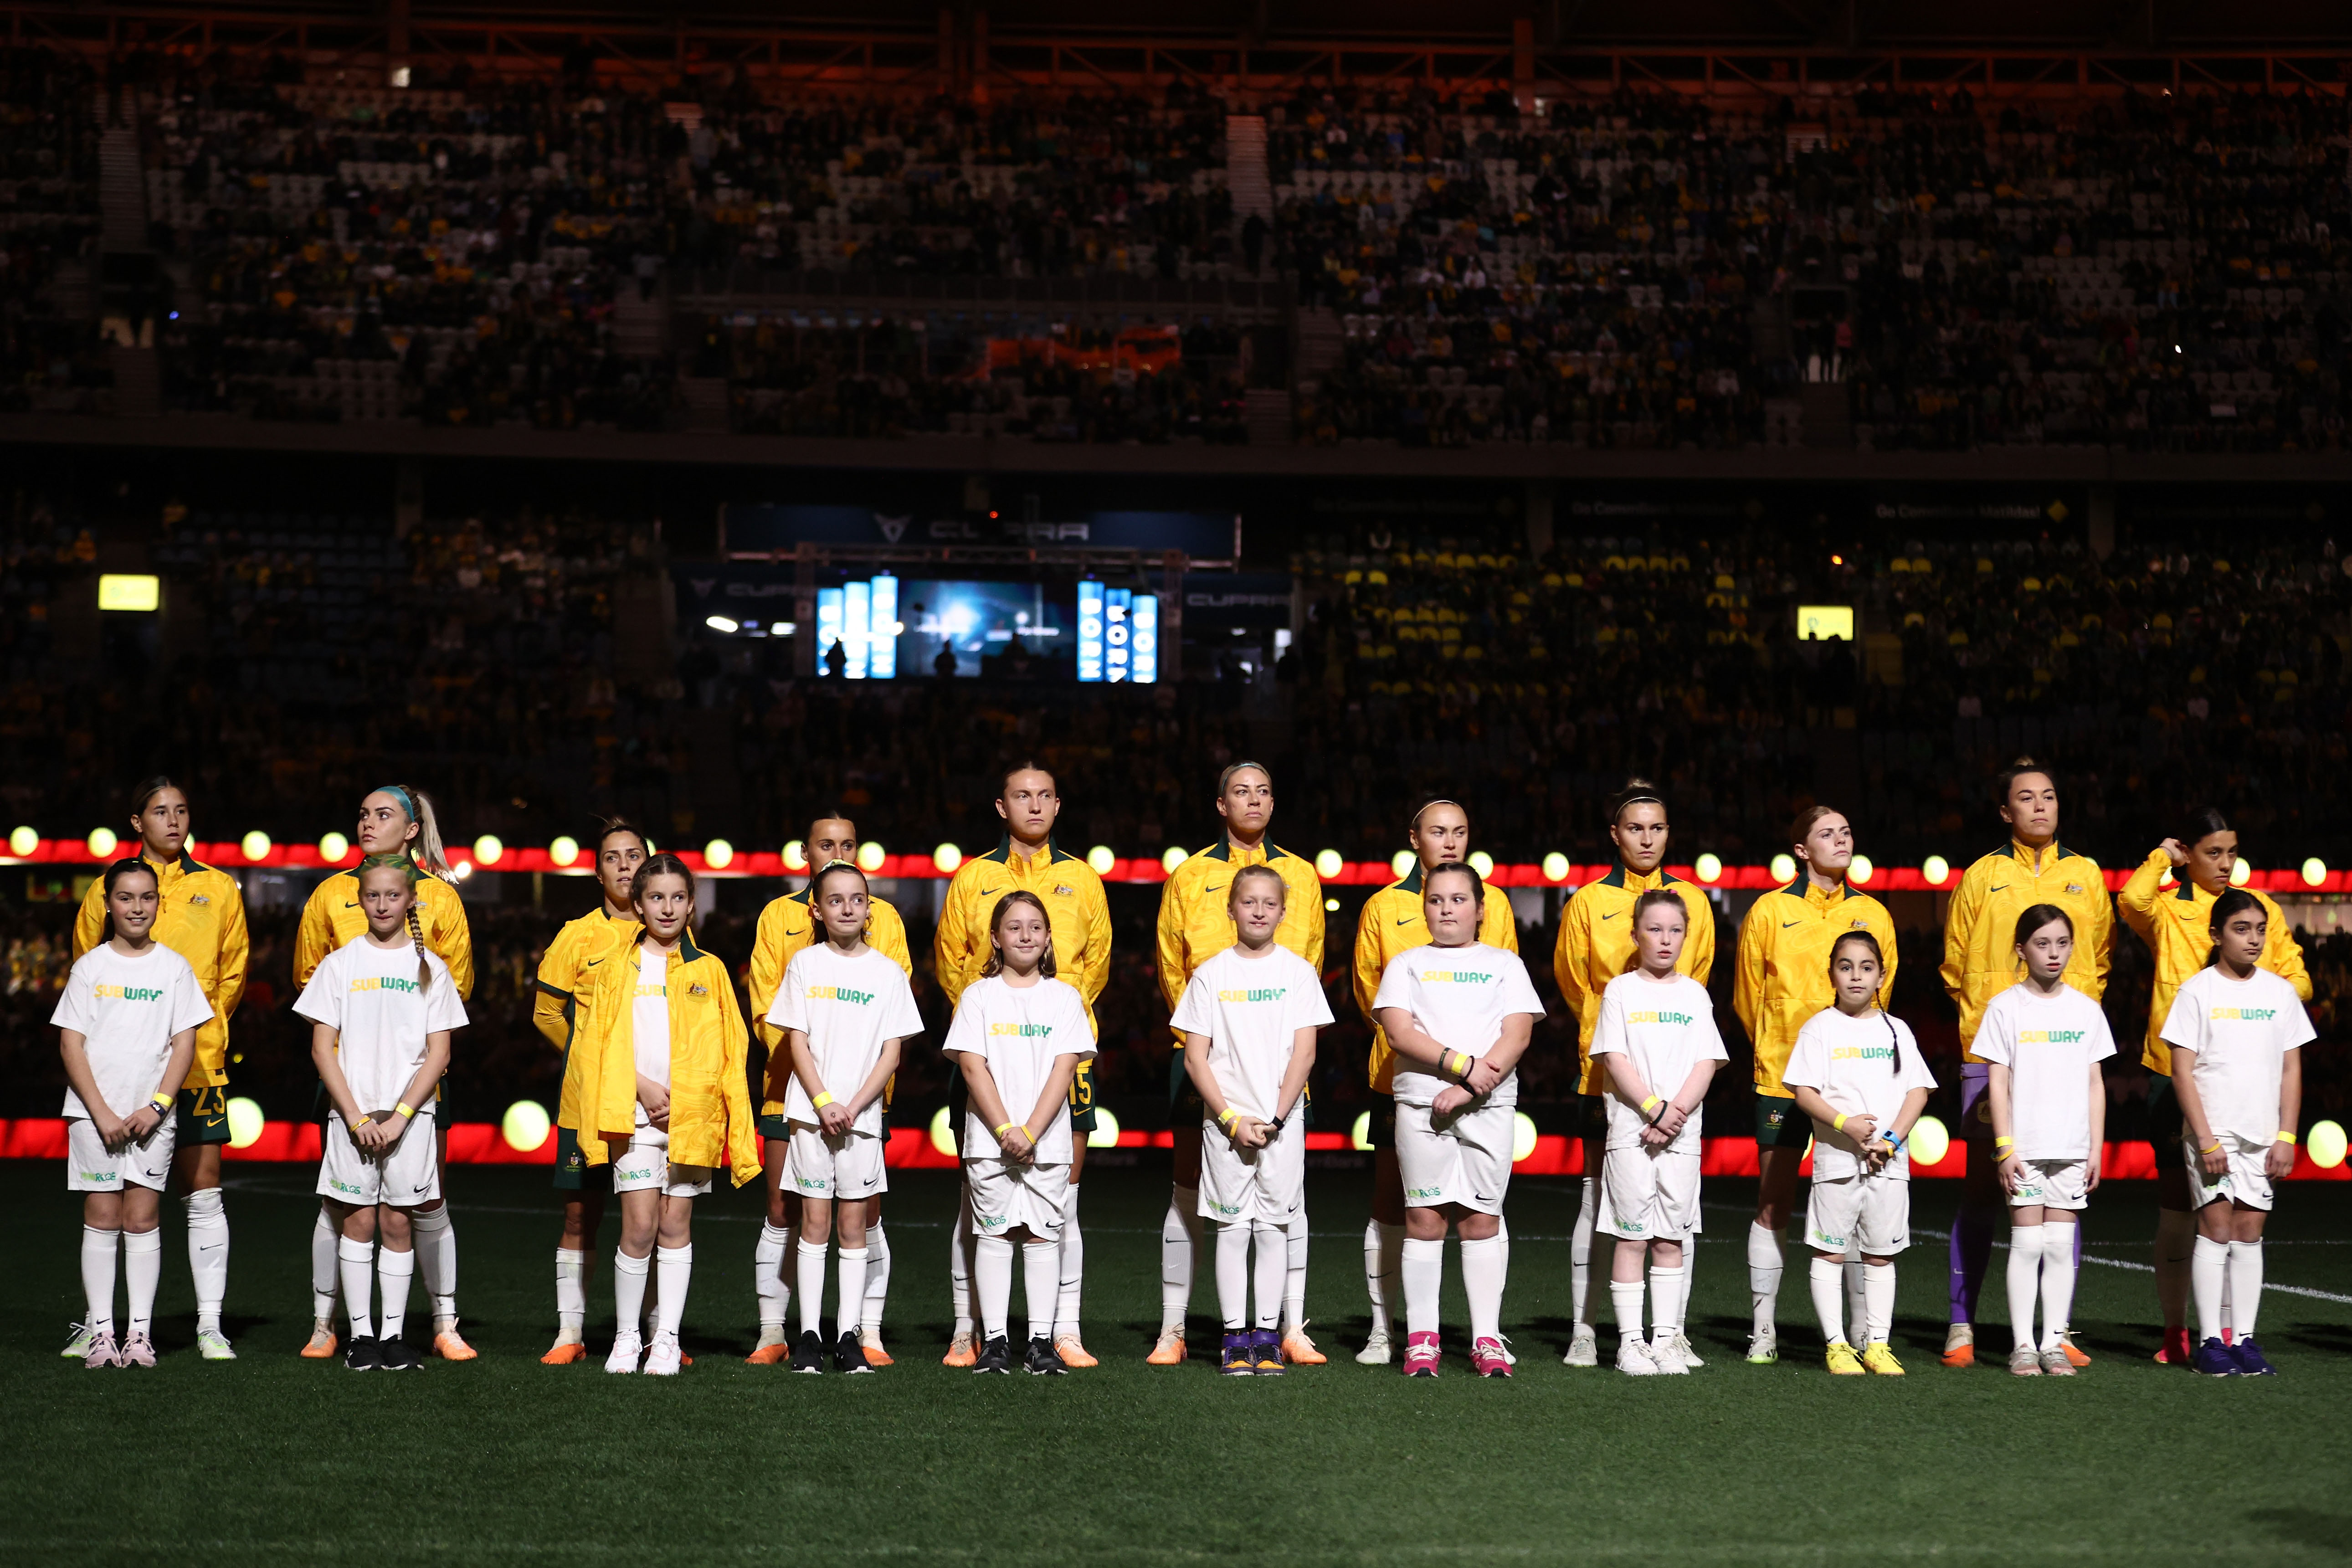 Matildas players stand together for the national anthems during the International Friendly match between the Australia Matildas and France at Marvel Stadium on July 14, 2023 in Melbourne, Australia. (Photo by Robert Cianflone/Getty Images)